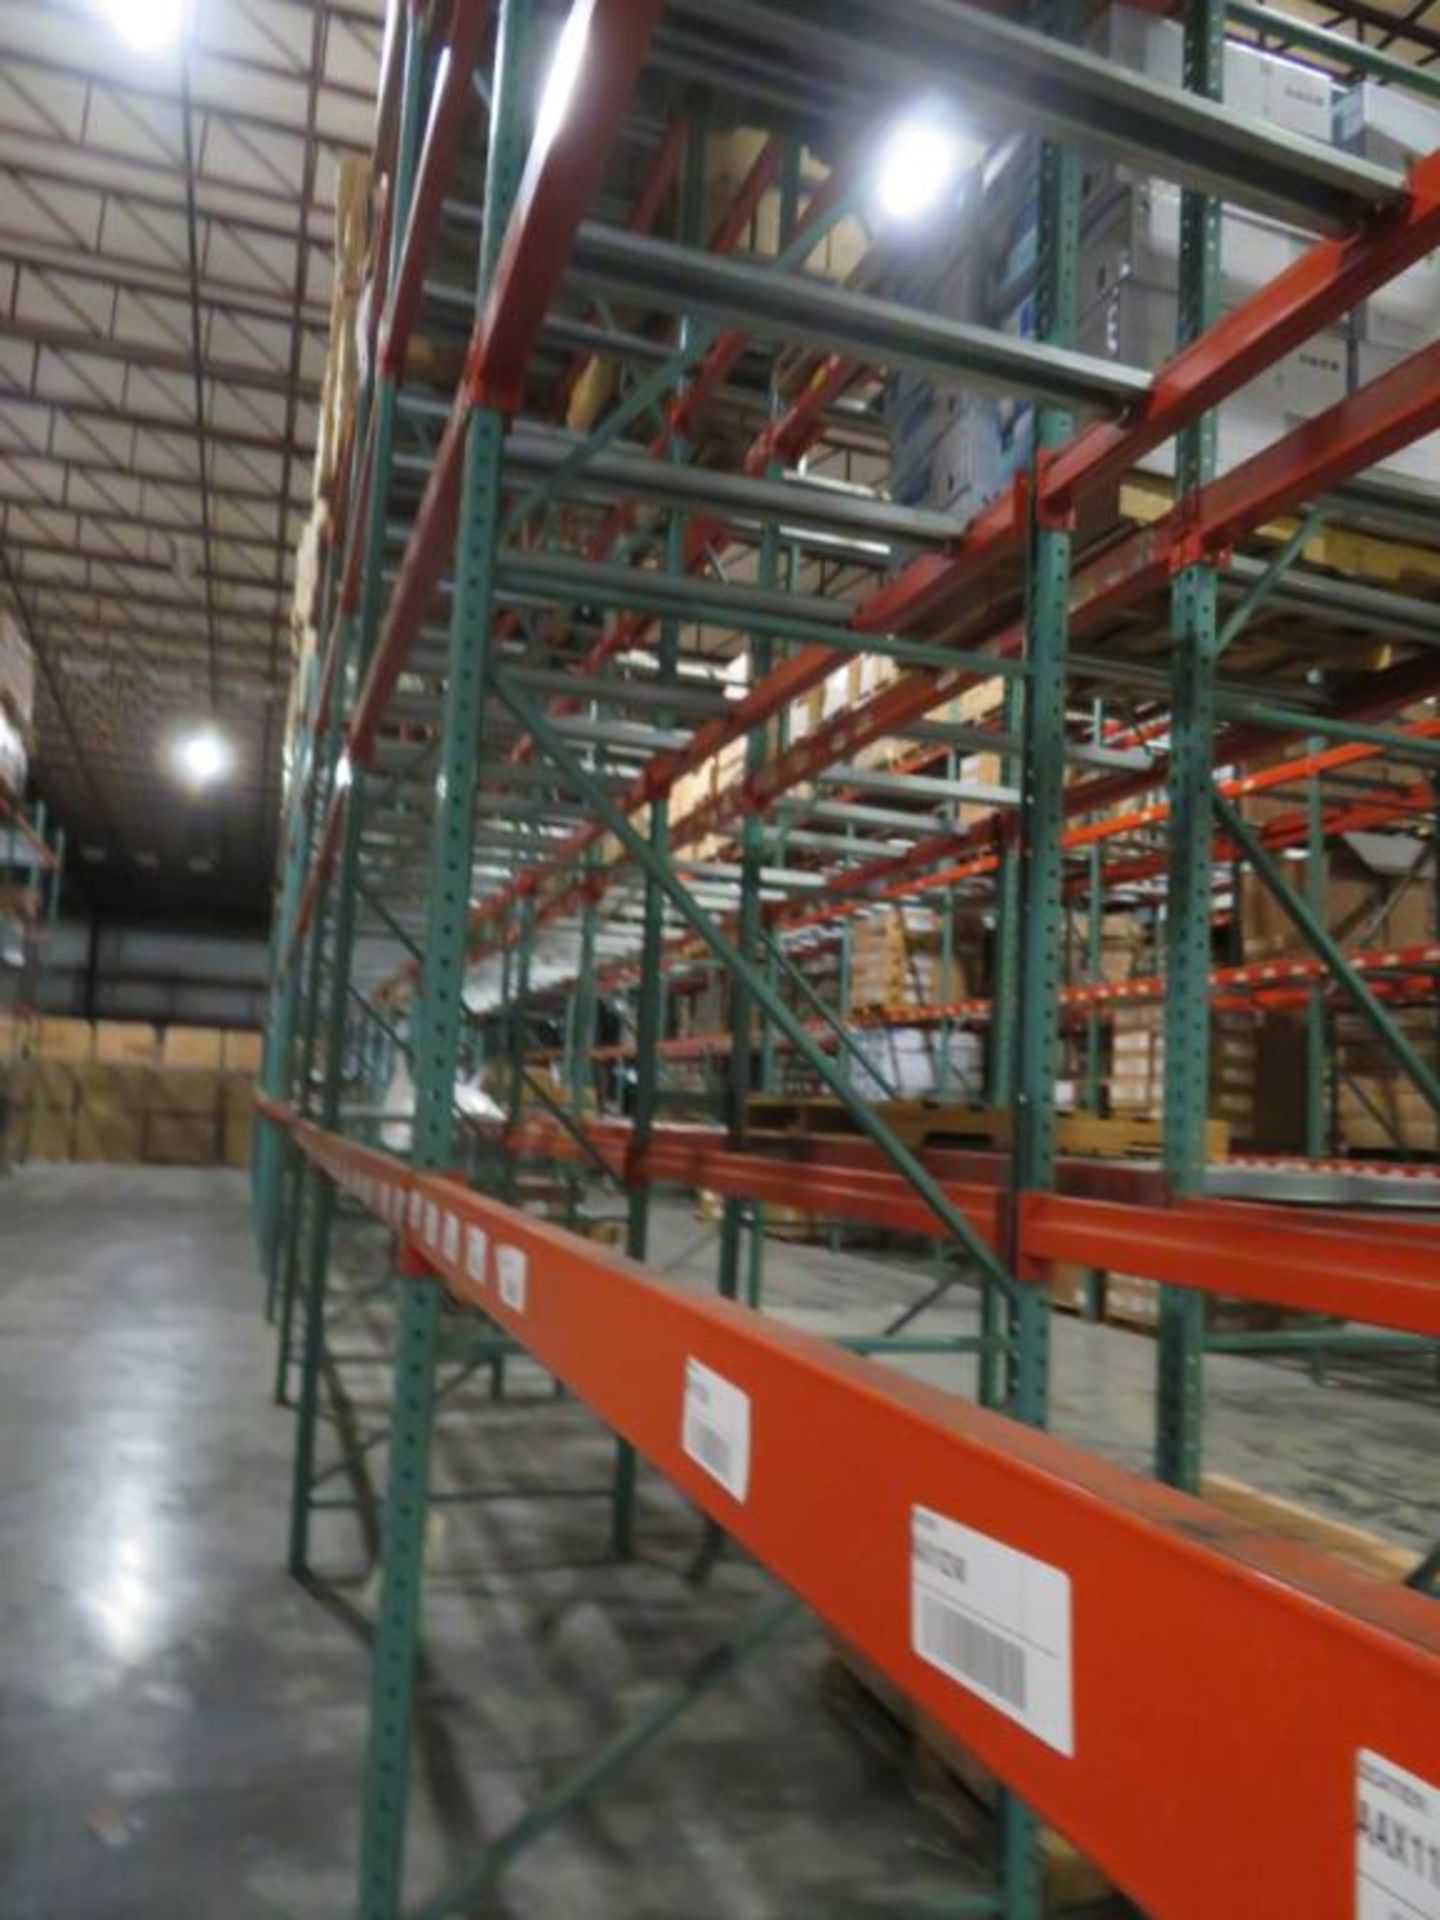 Interlake pallet racking 12 uprights 3"x 2 1/4", 44" wide and 20' tall, 88 beams 4 1/4"x 2 3/4" & - Image 3 of 4